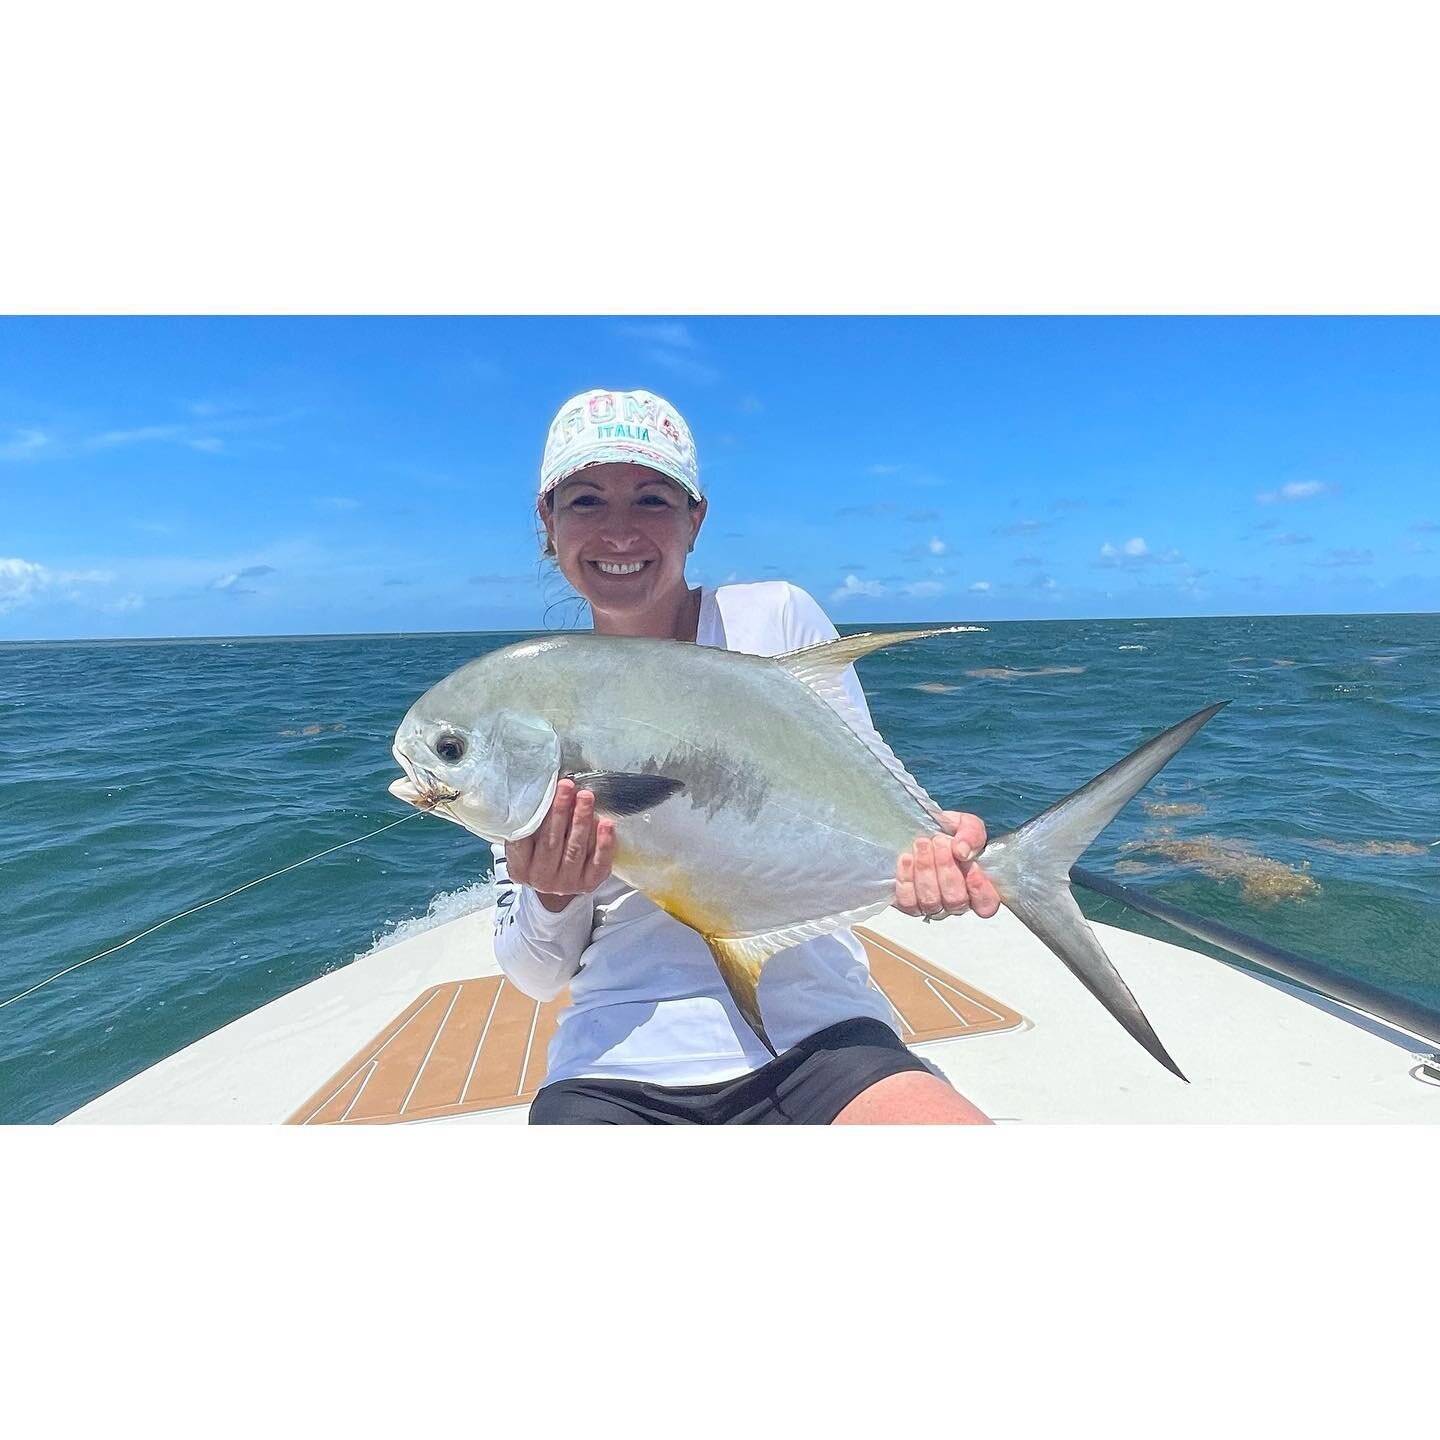 First time sight fishing as a birthday gift for Tina Marie from her husband Mario; and it was a fun one.#fifteenthshotisthecharm for her first #permit and 2 mutton snappers earlier in the day. The bonefish proved to be to quick and elusive for her bu